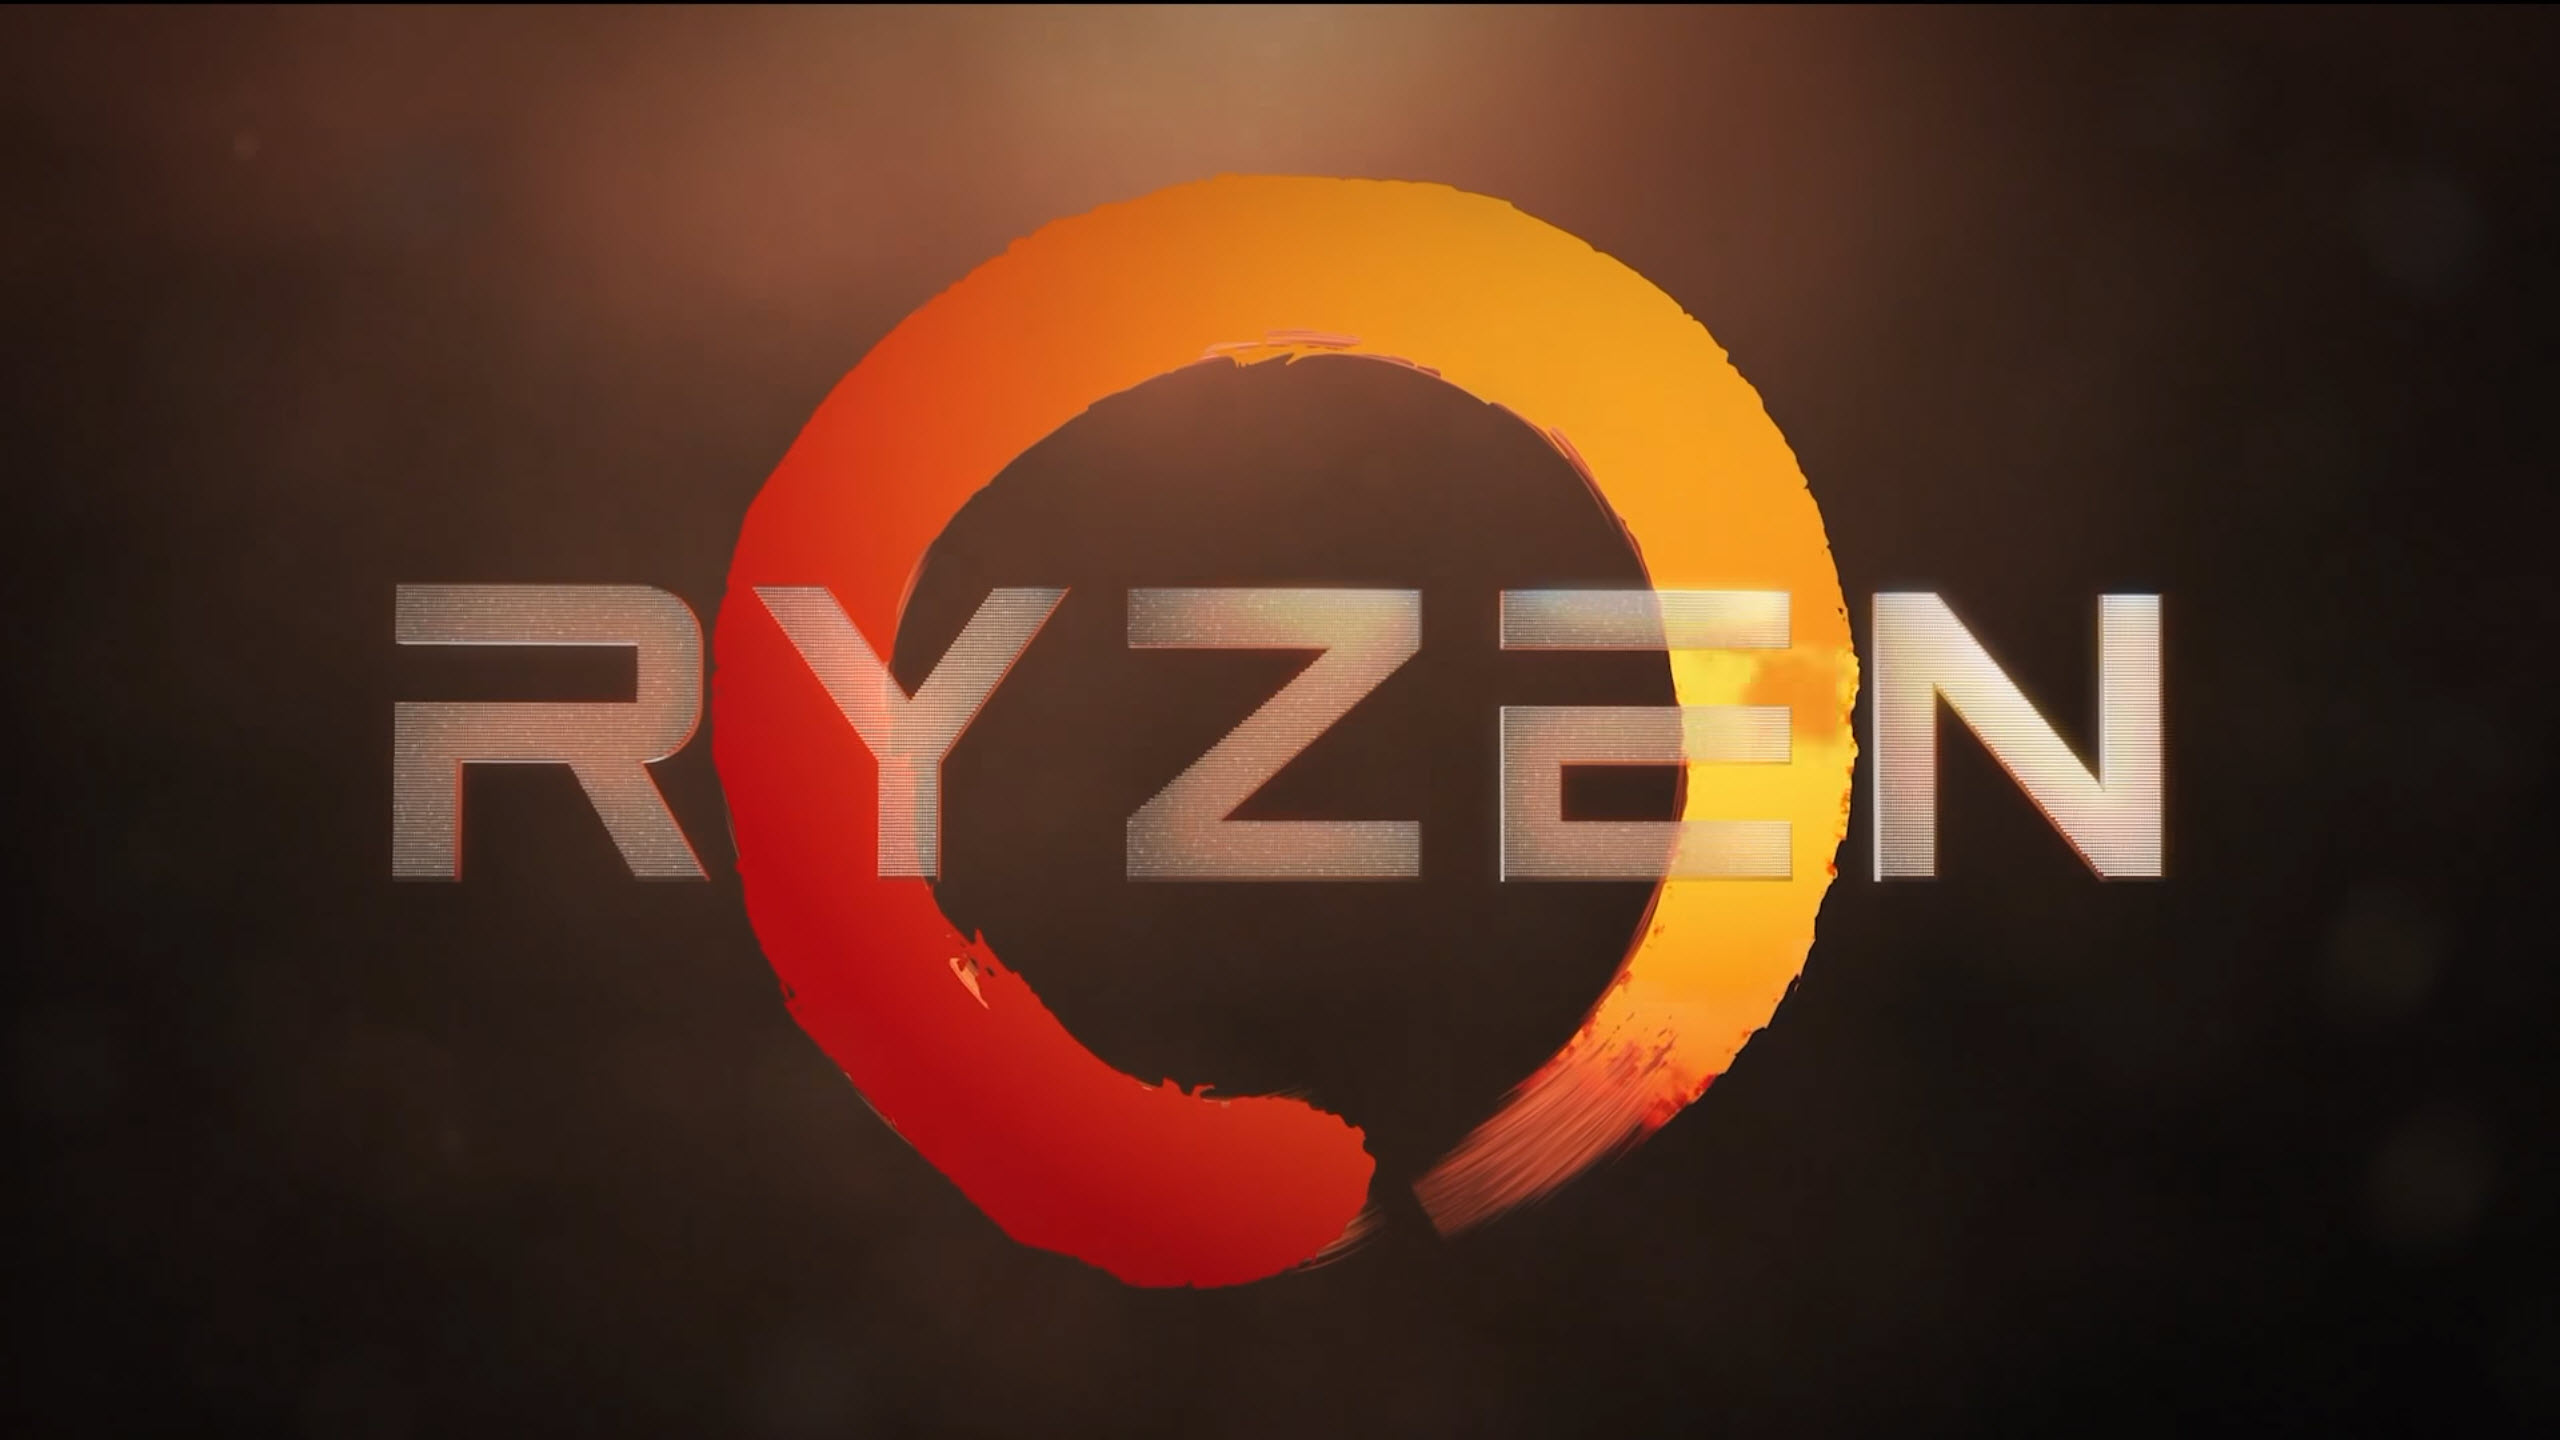 Early AMD Ryzen Review Leaked, Faster Than Intel Core i7-6800K